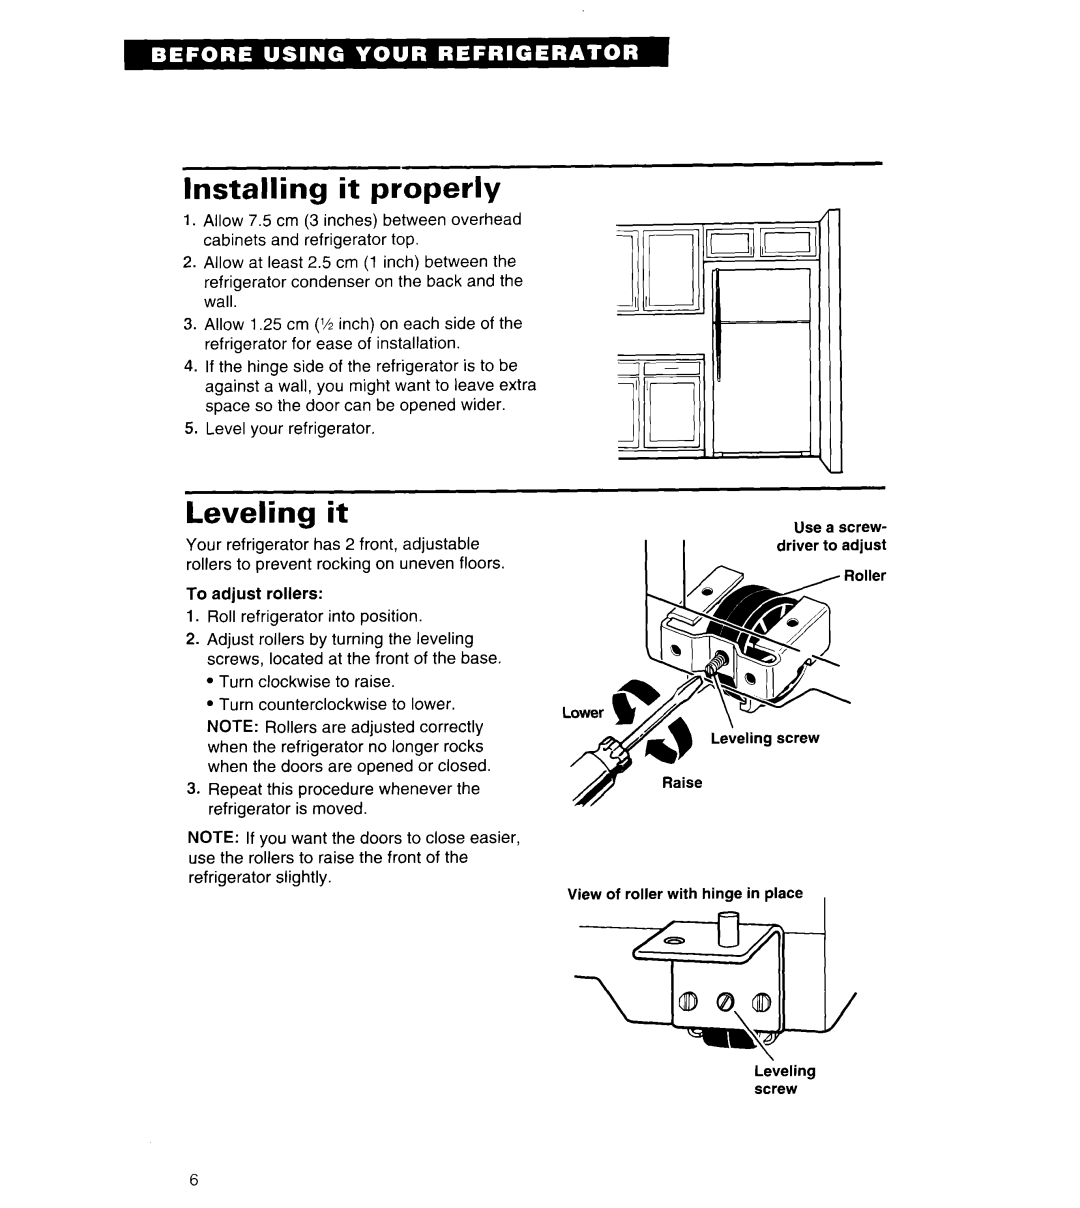 Whirlpool 4ET14GK important safety instructions Installing it properly, Leveling it 